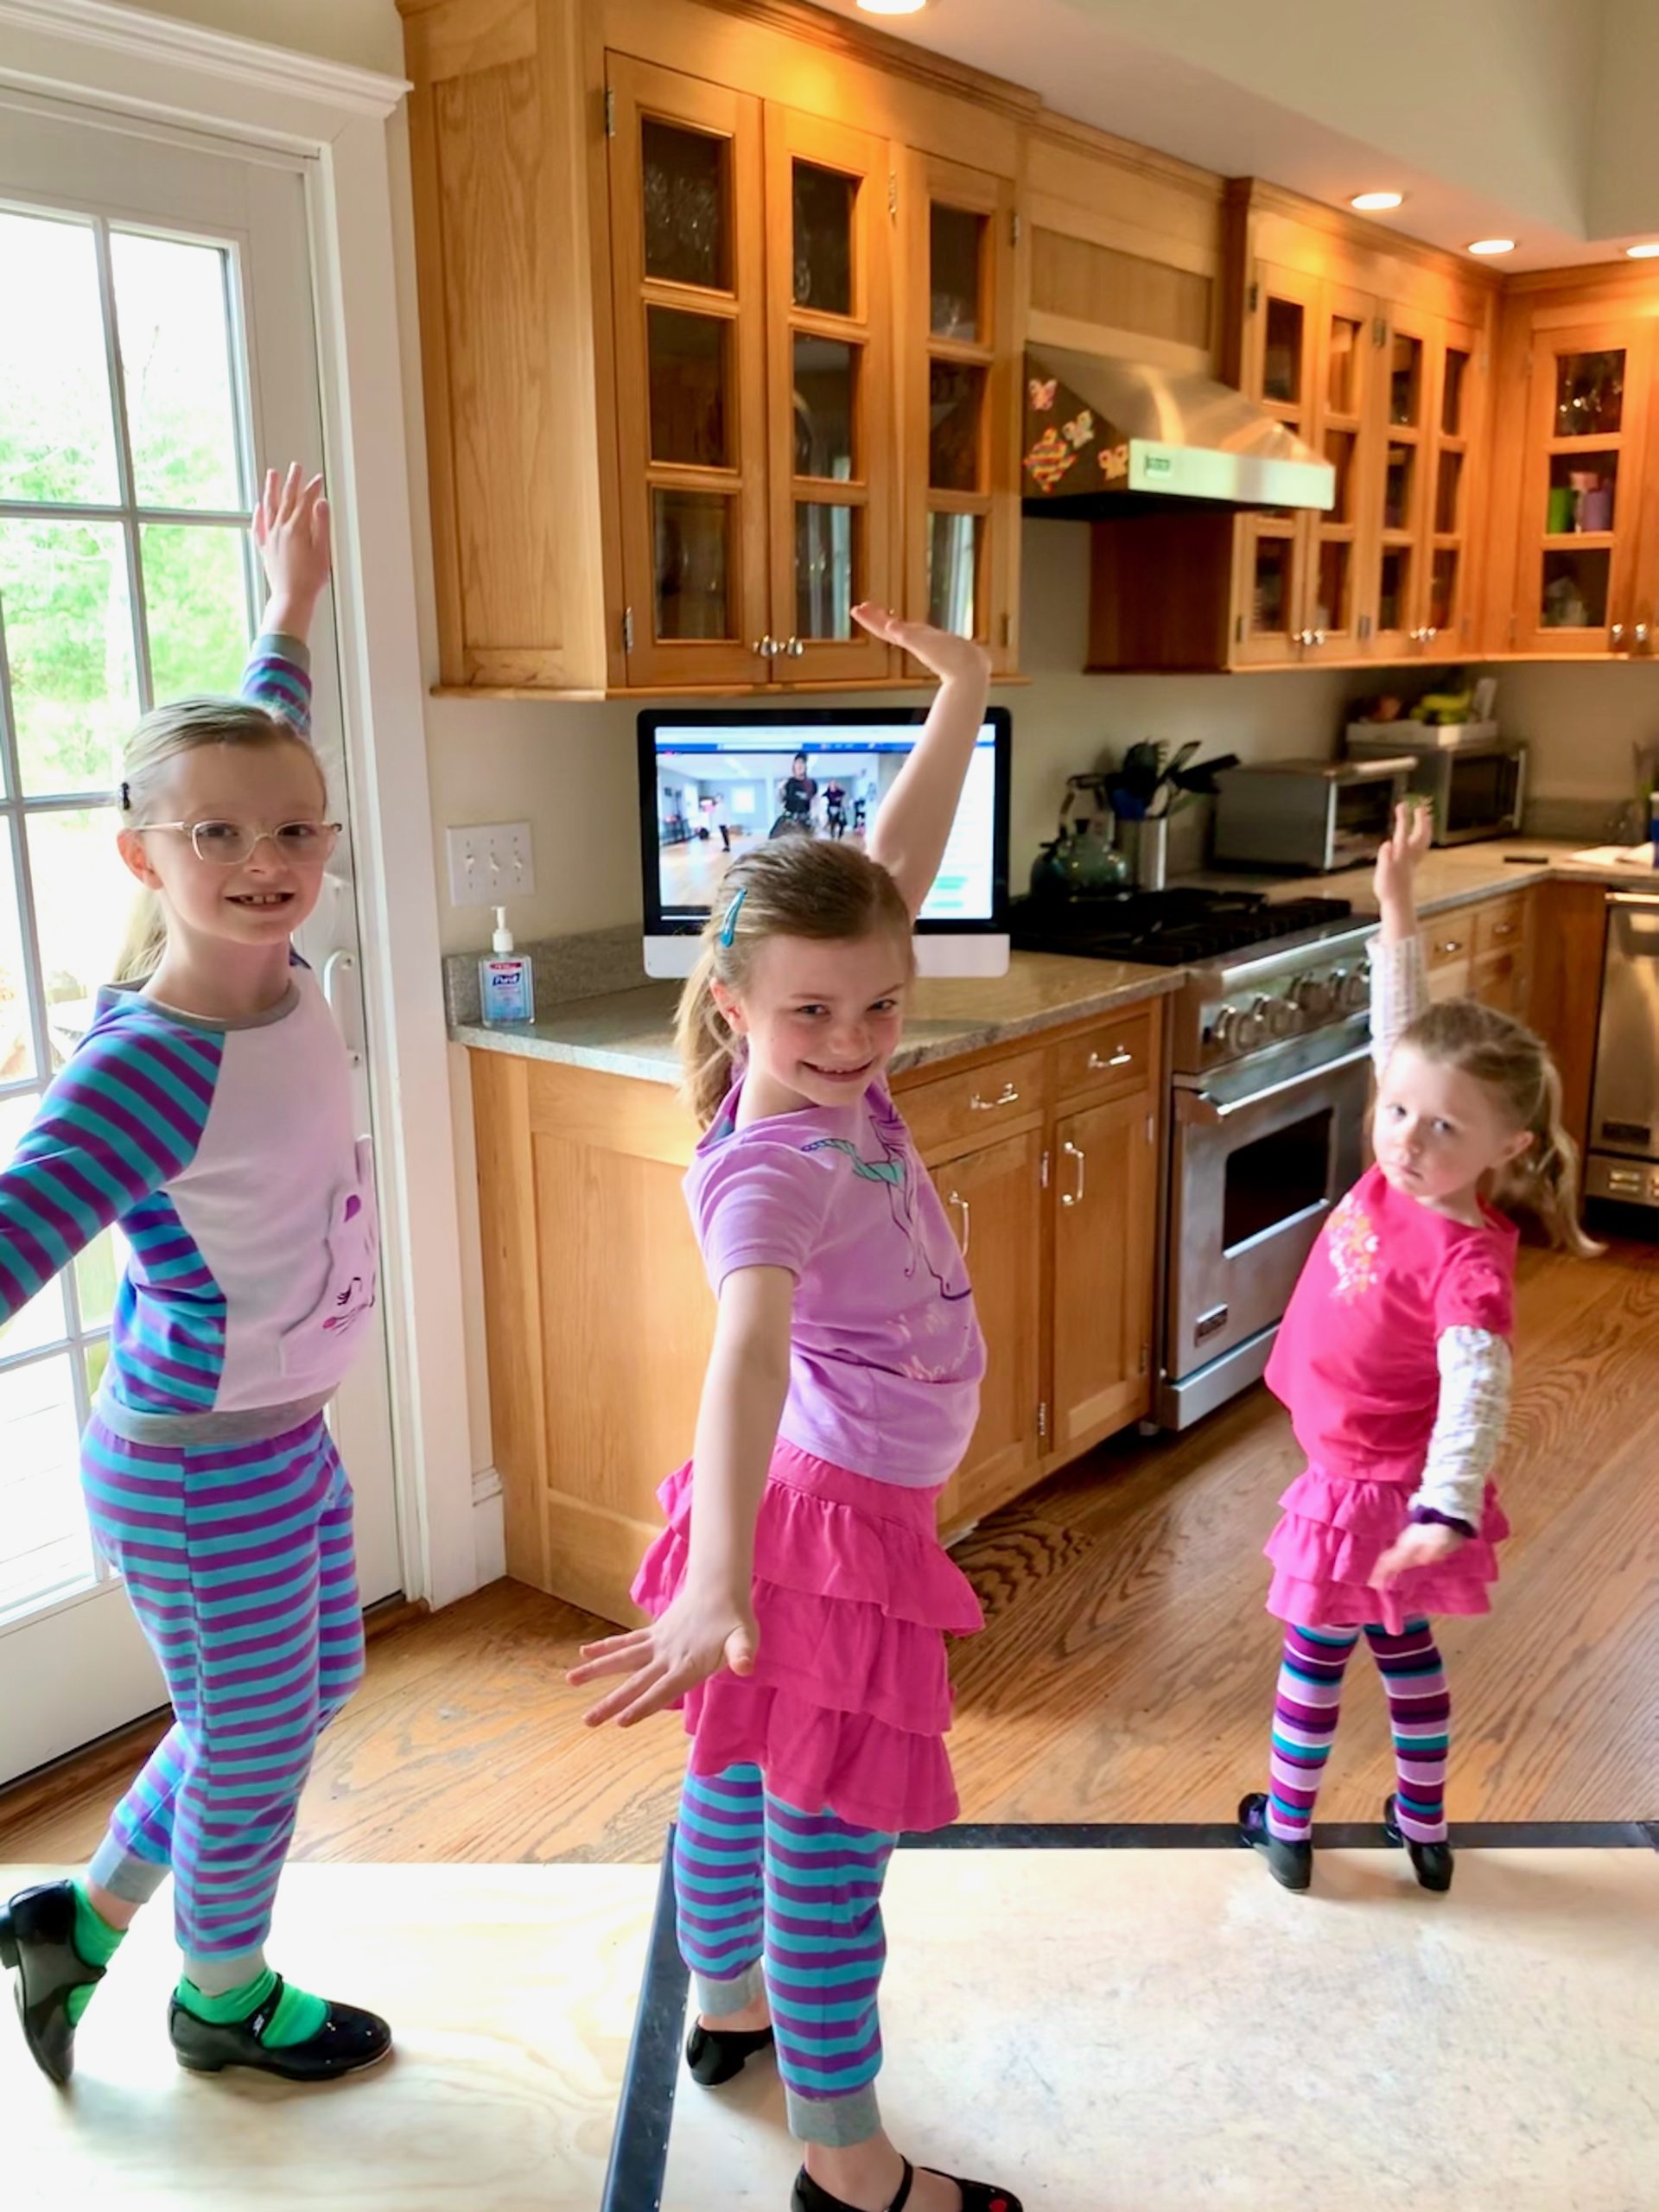 The Tupper girls - Maeve, Brynn and Clare - have followed along with their favorite tap dancing class from home every morning during the quarantine. 